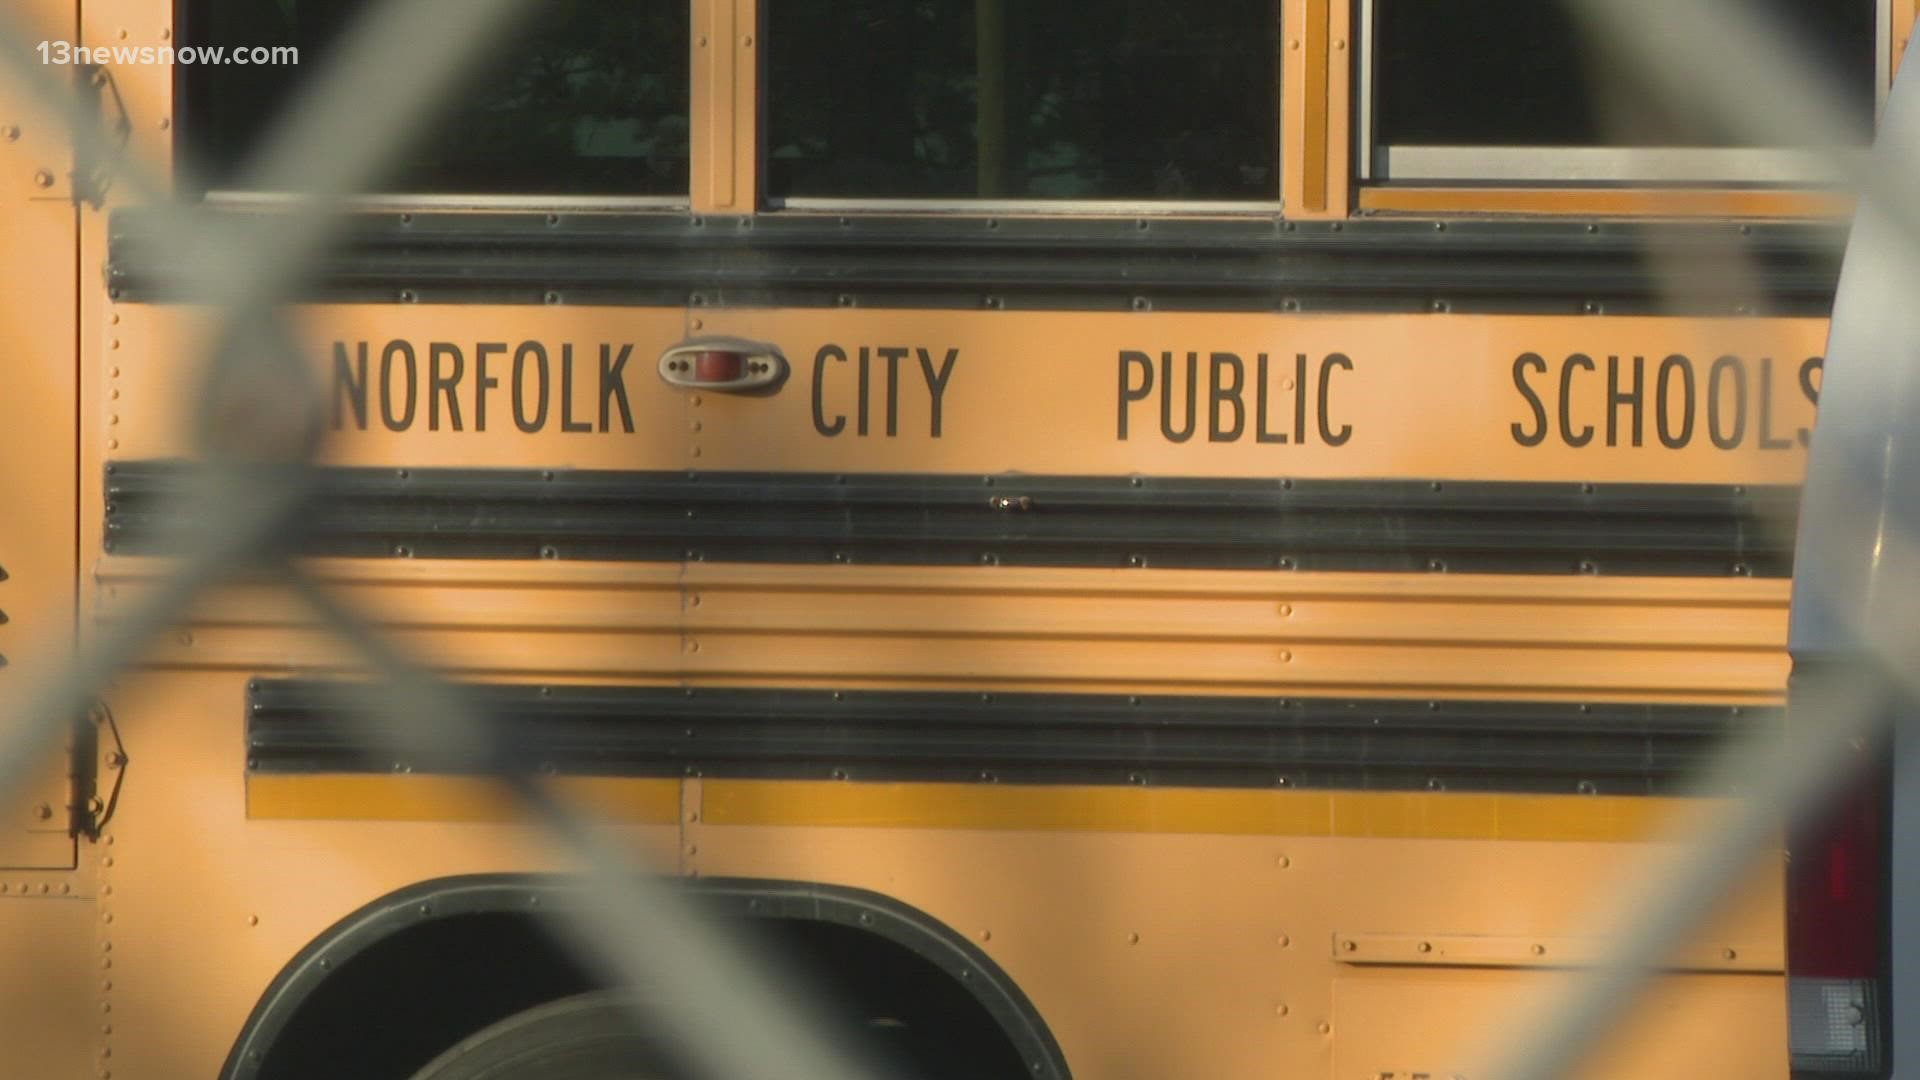 Norfolk Public Schools told 13News Now "we anticipate delays for Thursday bus routes as well due to staff shortages."